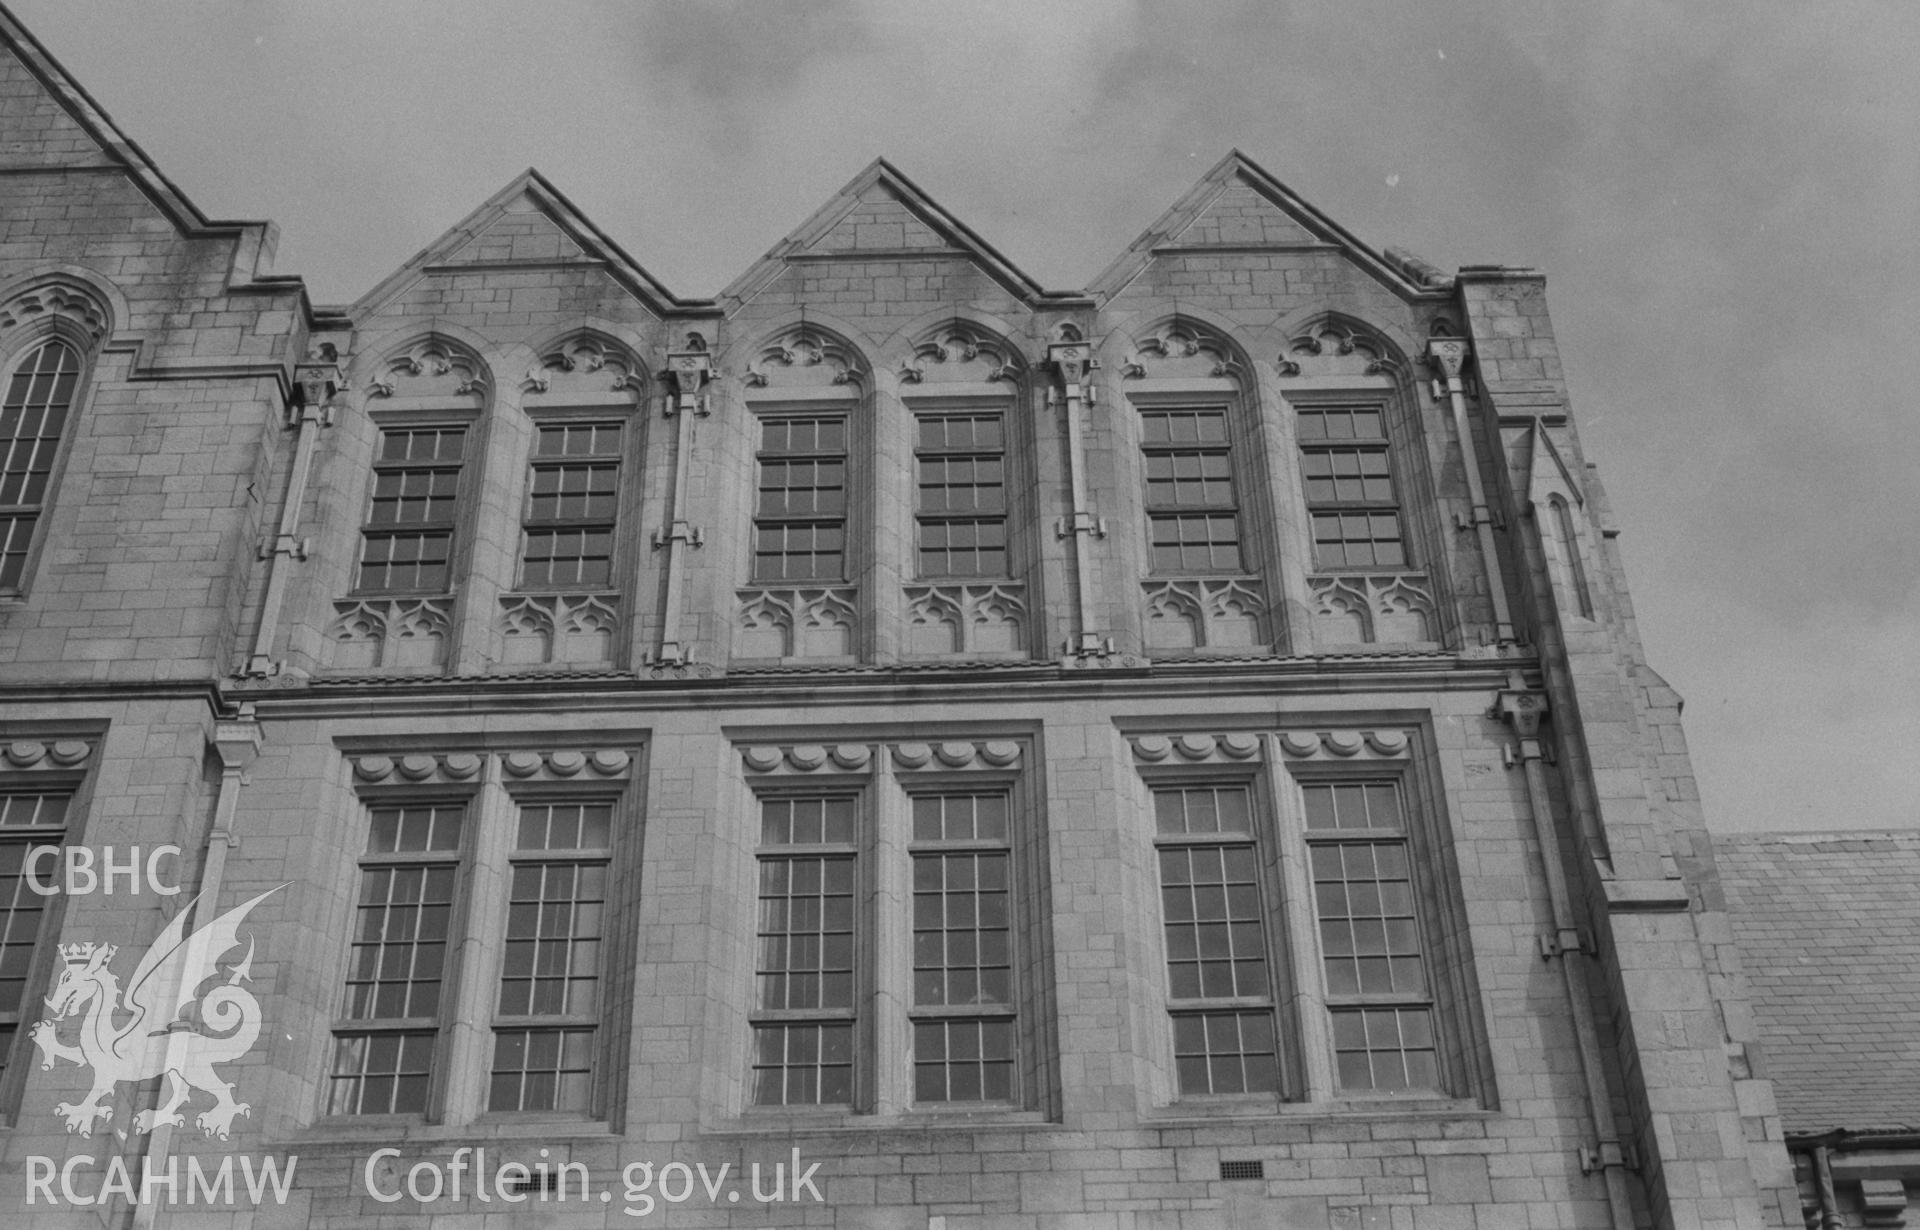 Digital copy of a black and white negative showing detail of windows in the north west facing side of the Old College, on Aberystwyth promenade. Photographed by Arthur O. Chater on 15th August 1967 from Grid Reference SN 581 817.